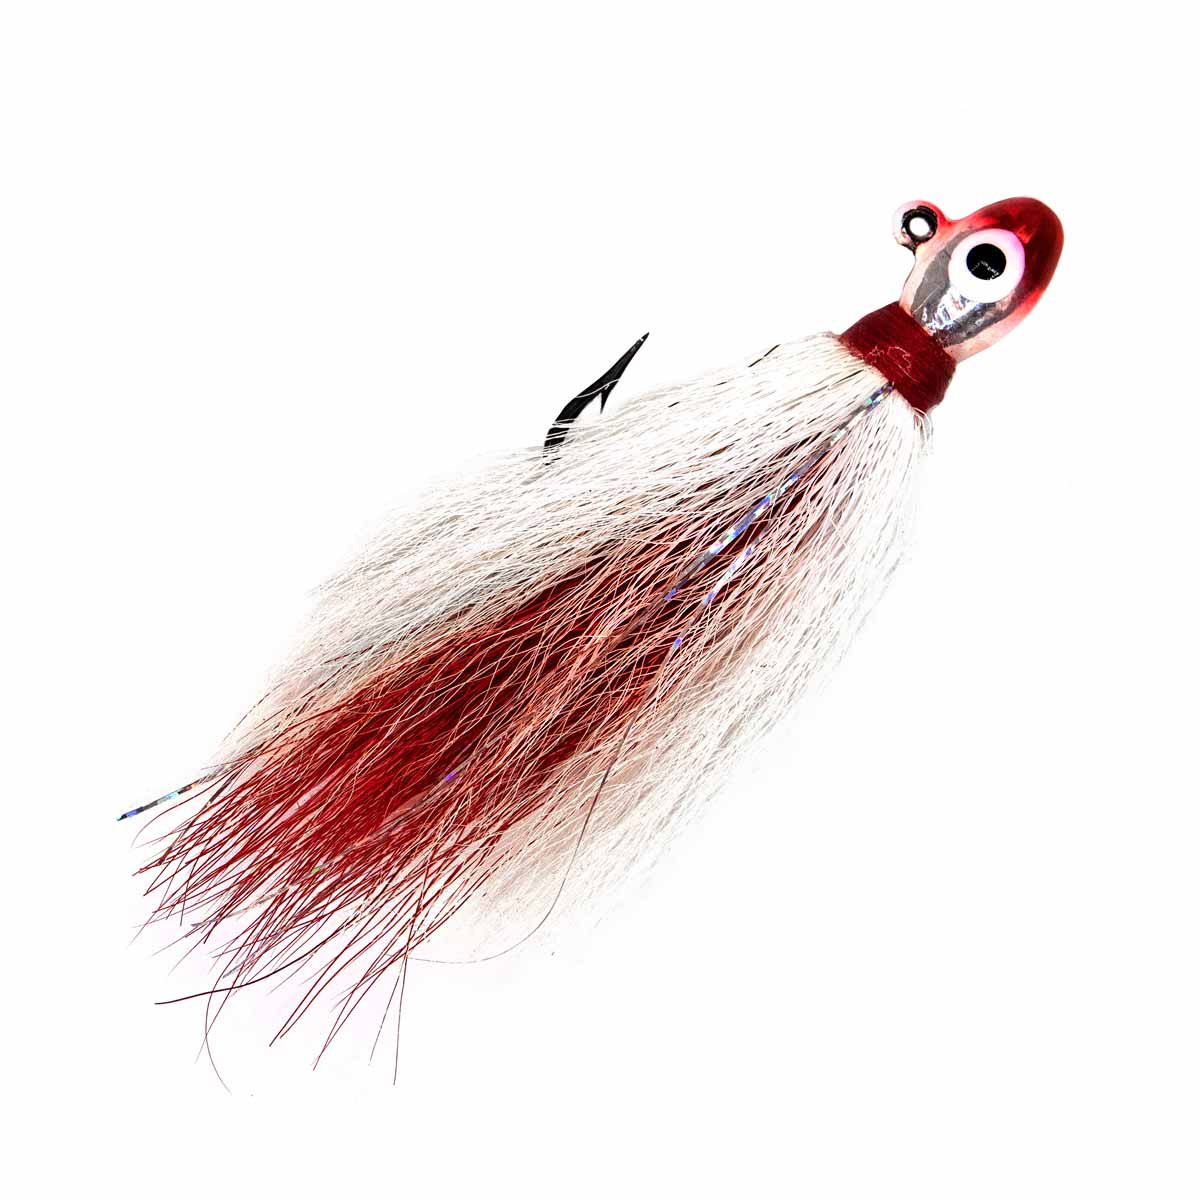 Charlie's Pompano Bucktail Jig (2 Pack) - Red Shad / 1/4oz.